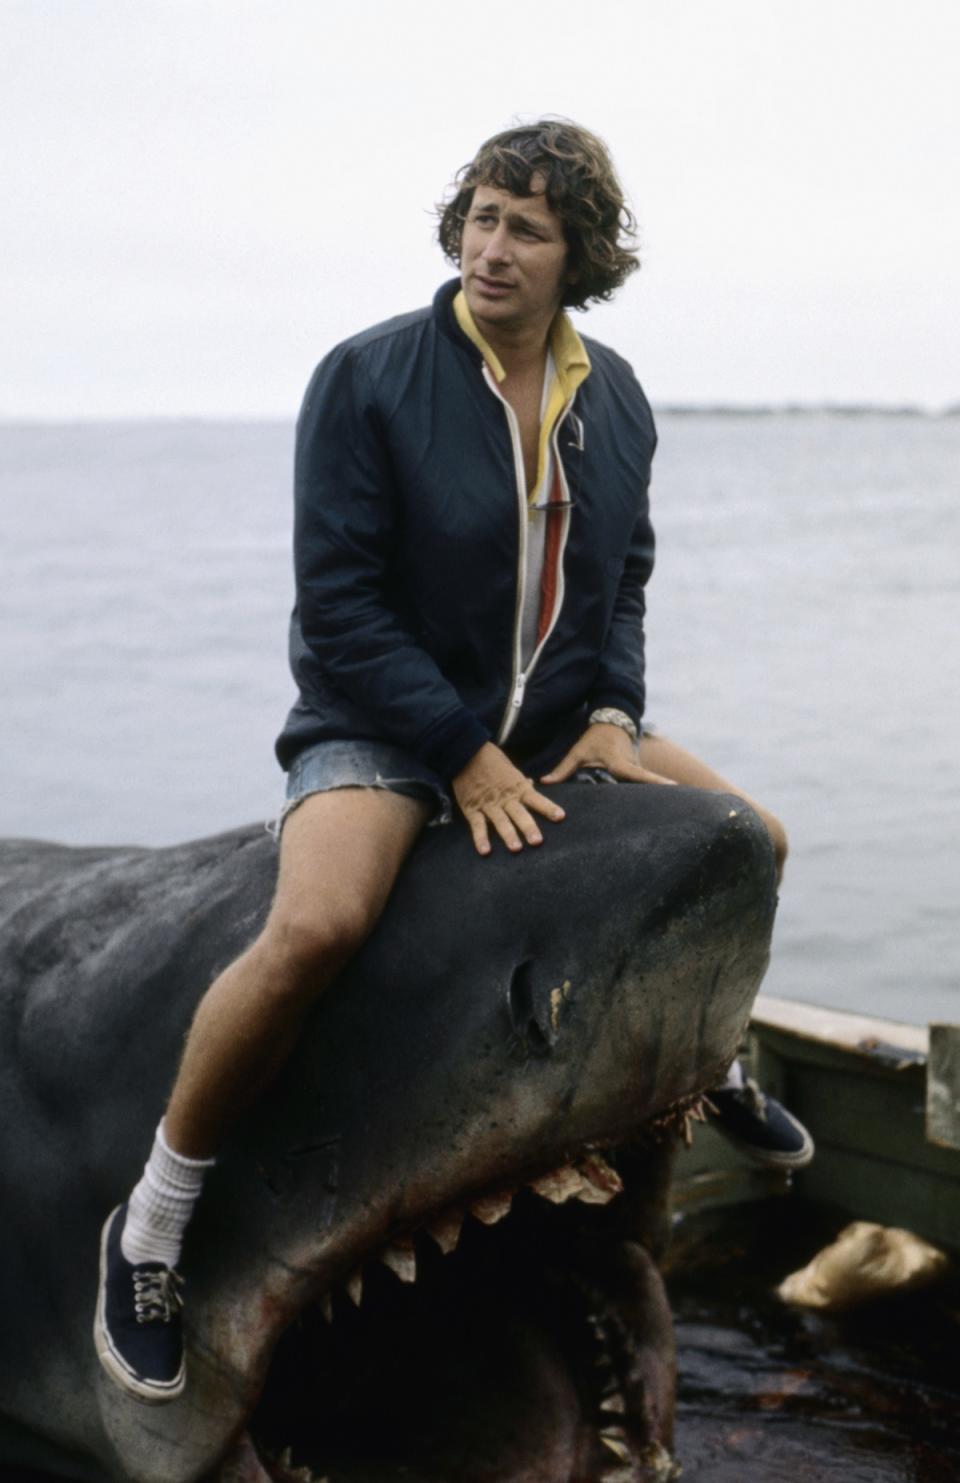 American director Steven Spielberg on the set of his movie, Jaws. (Photo by Sunset Boulevard/Corbis via Getty Images)